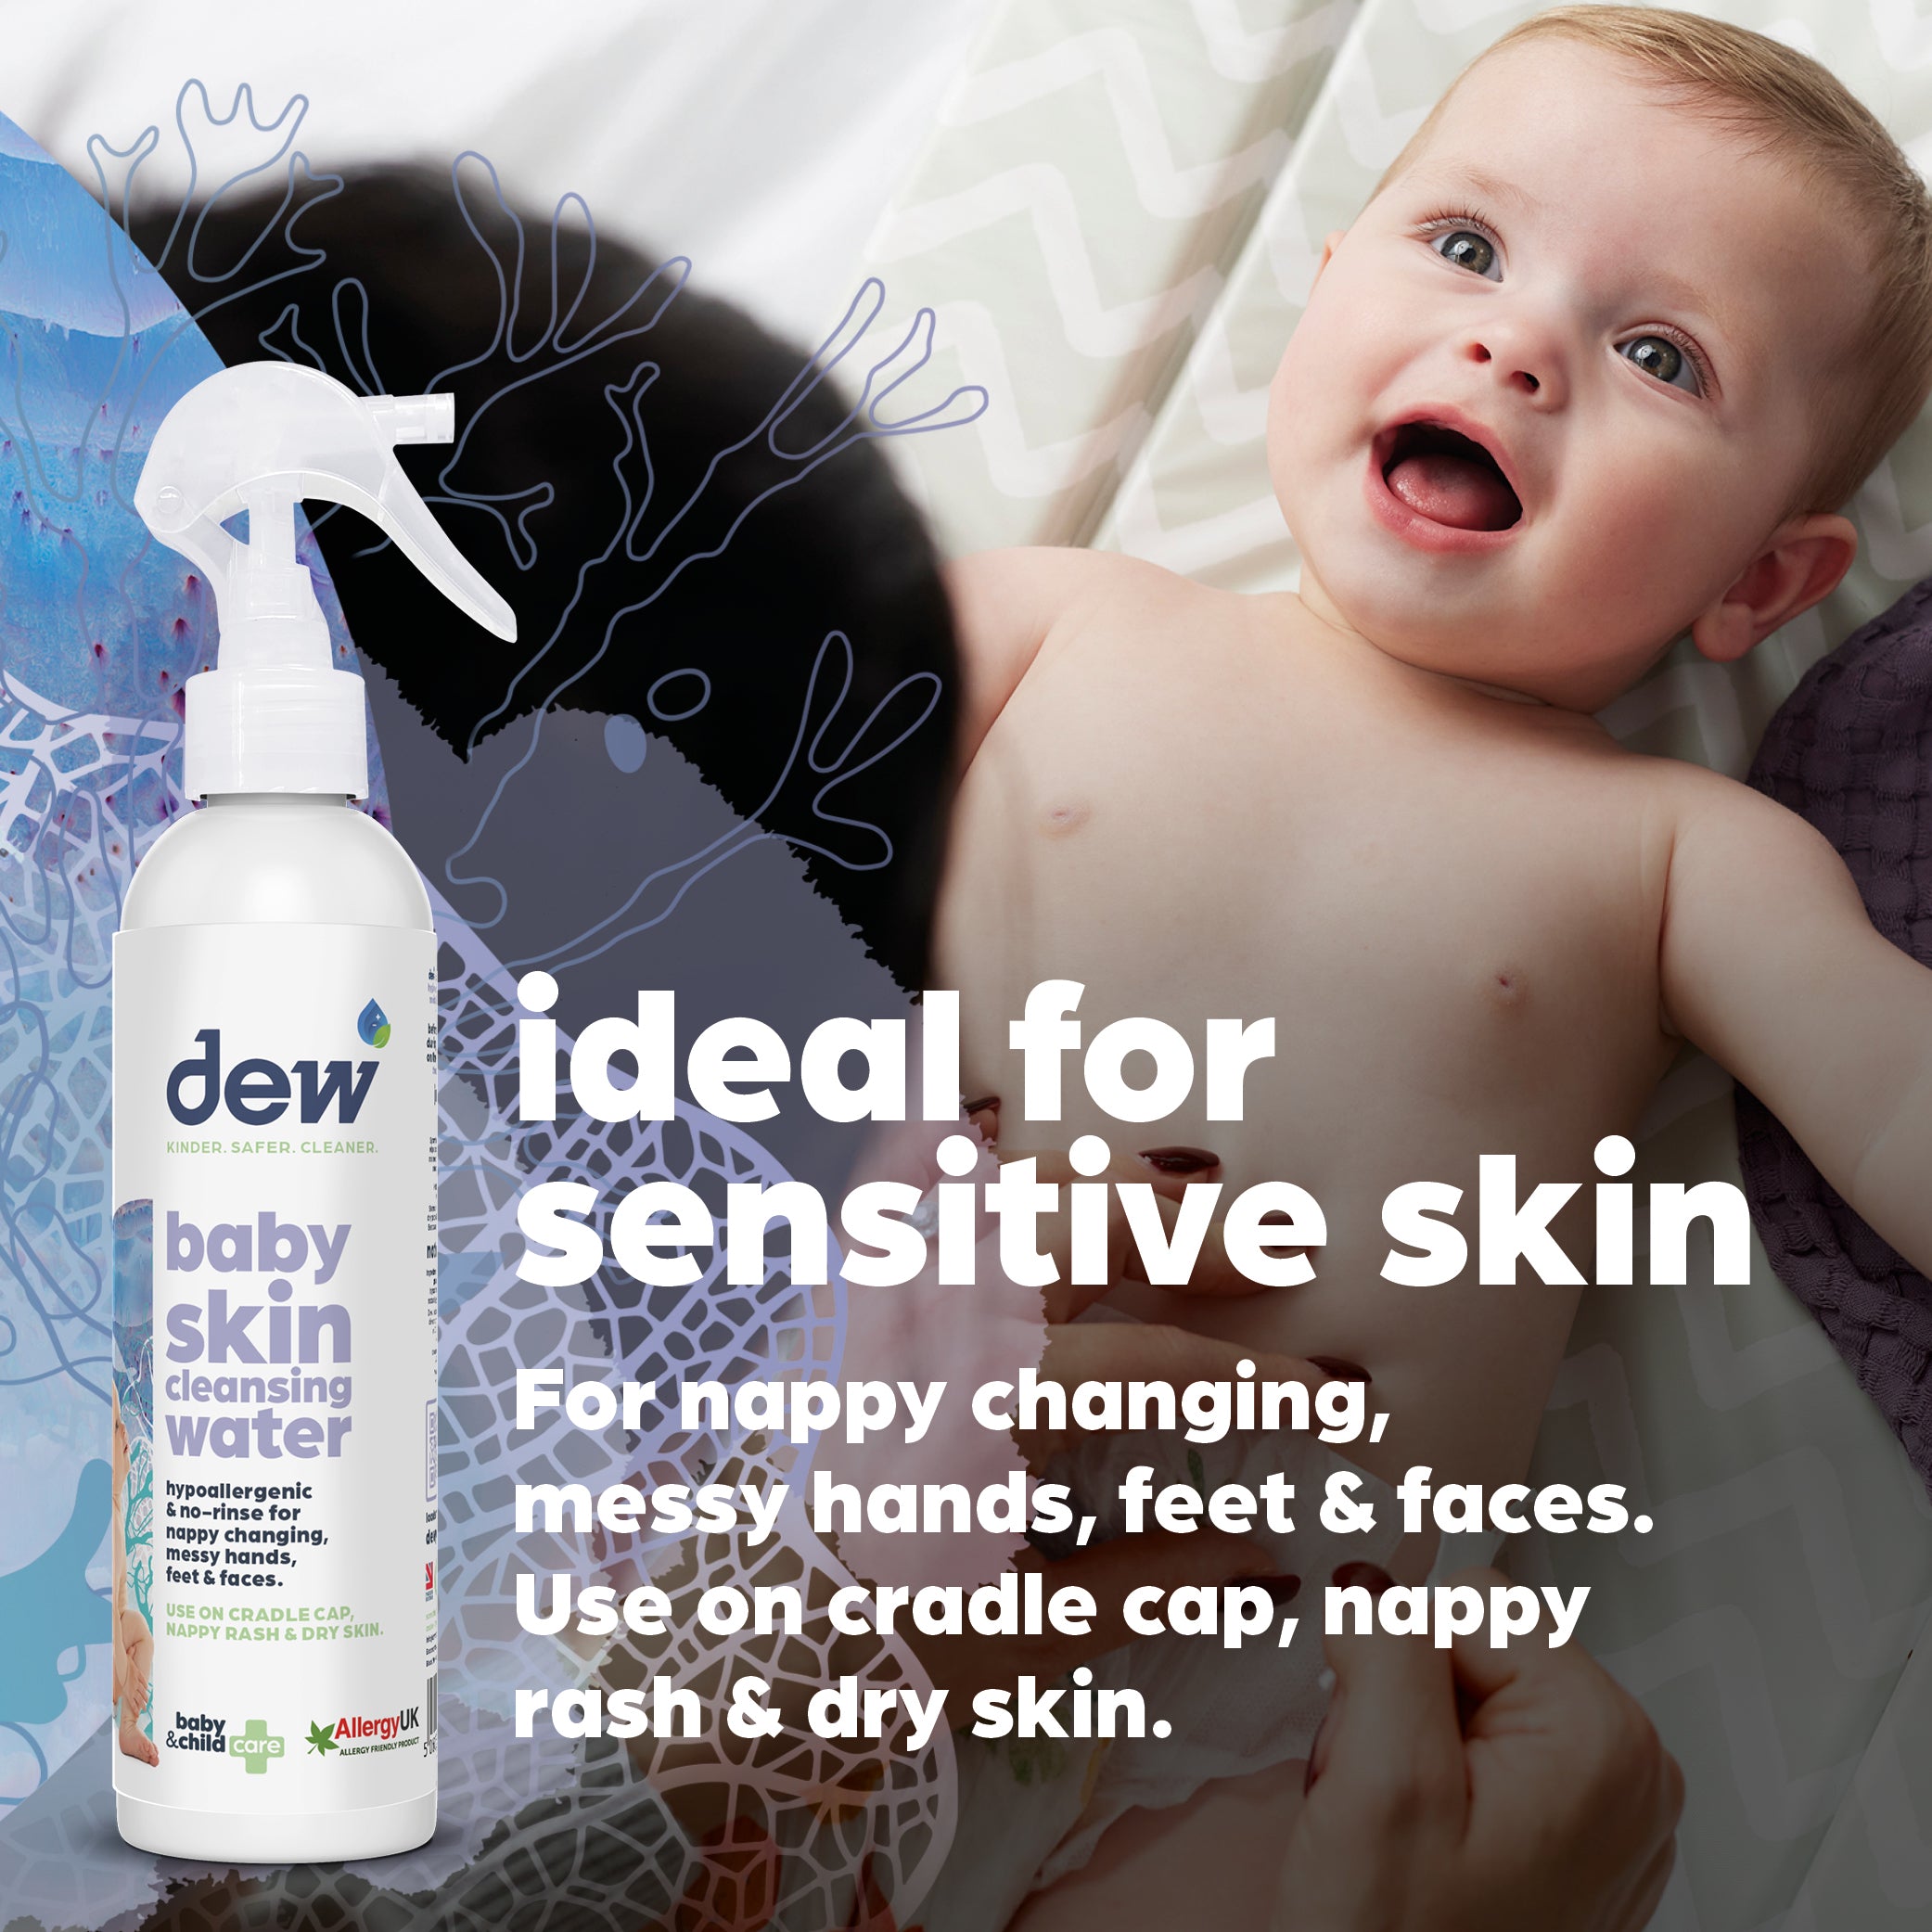 Baby Skin Cleansing Water - Ideal For Sensitive Skin